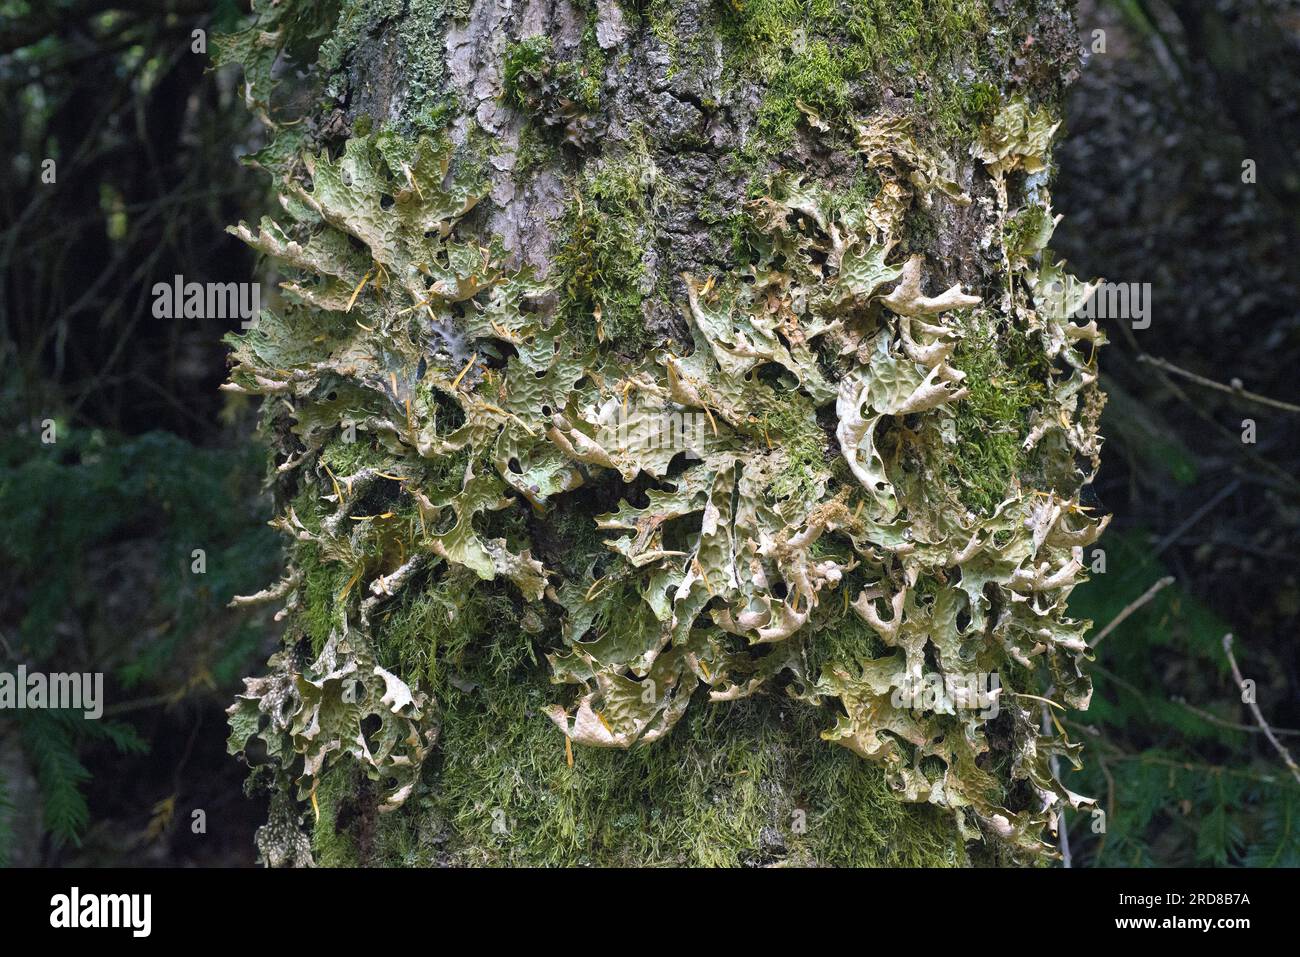 Lung lichen or lungwort lichen (Lobaria pulmonaria) is an epiphytic foliose lichen formed by the symbiotic union of one fungus species, an green alga Stock Photo